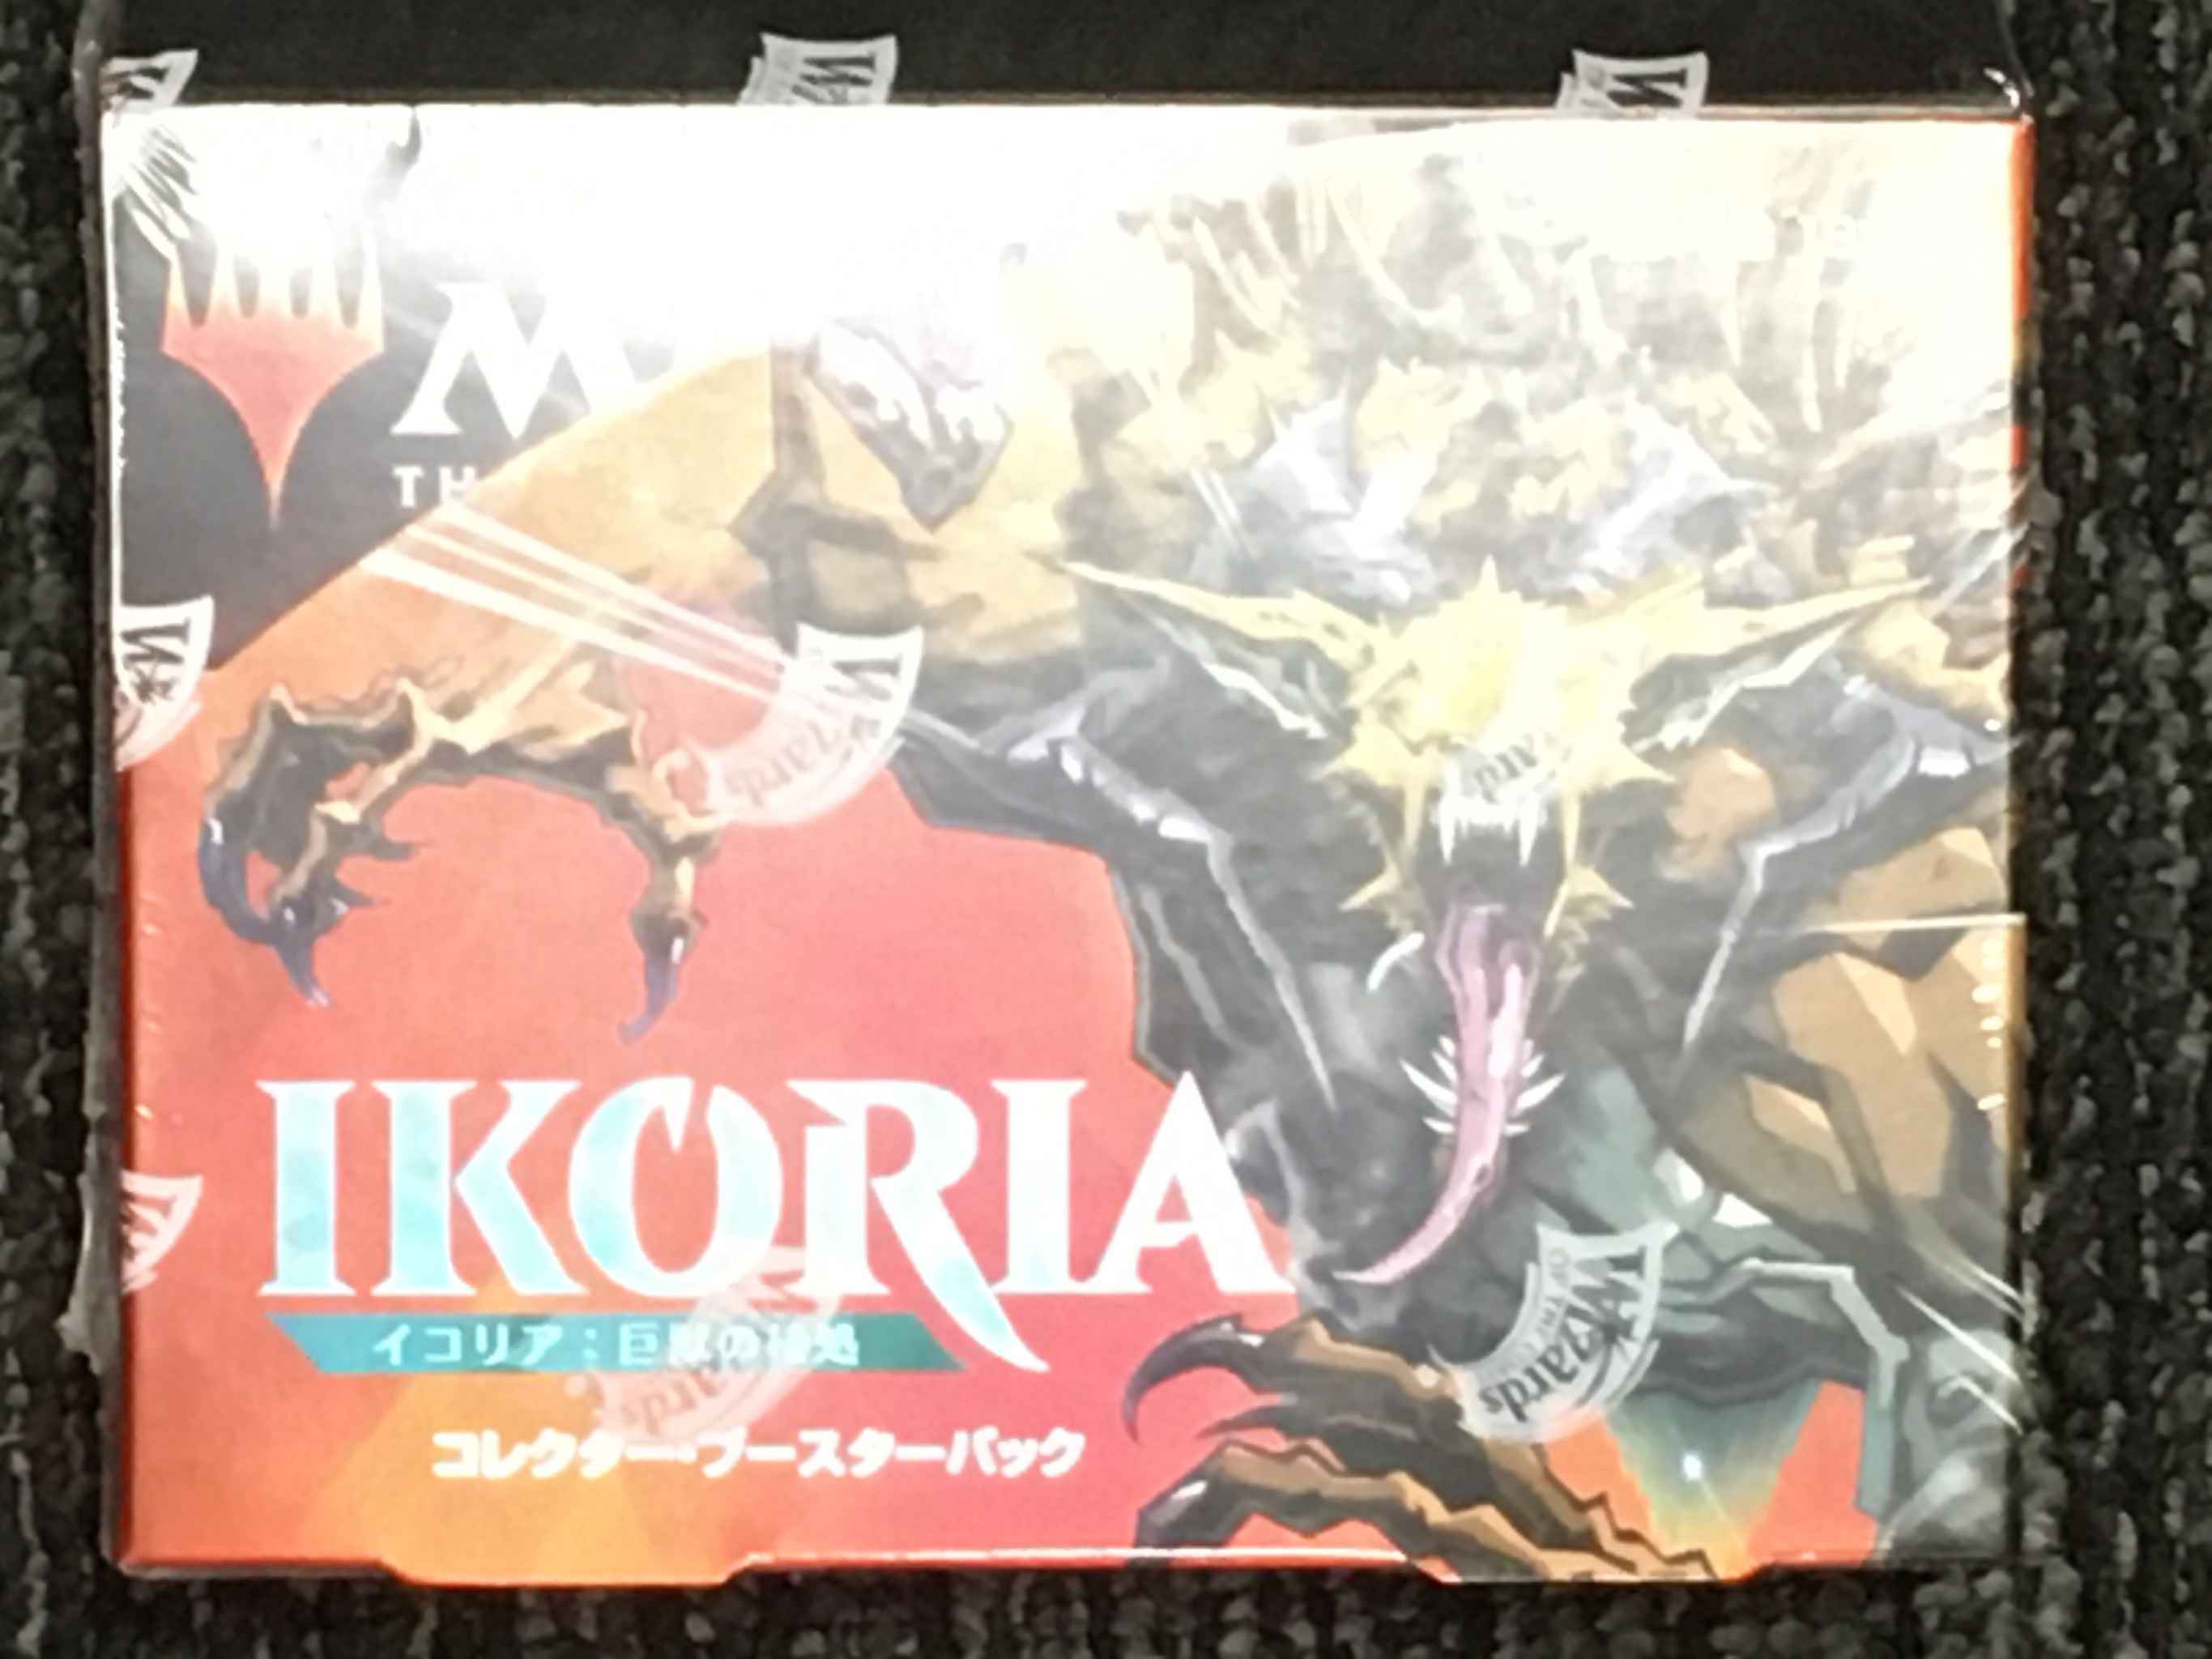 Ikoria Collector Booster Pack Worth It